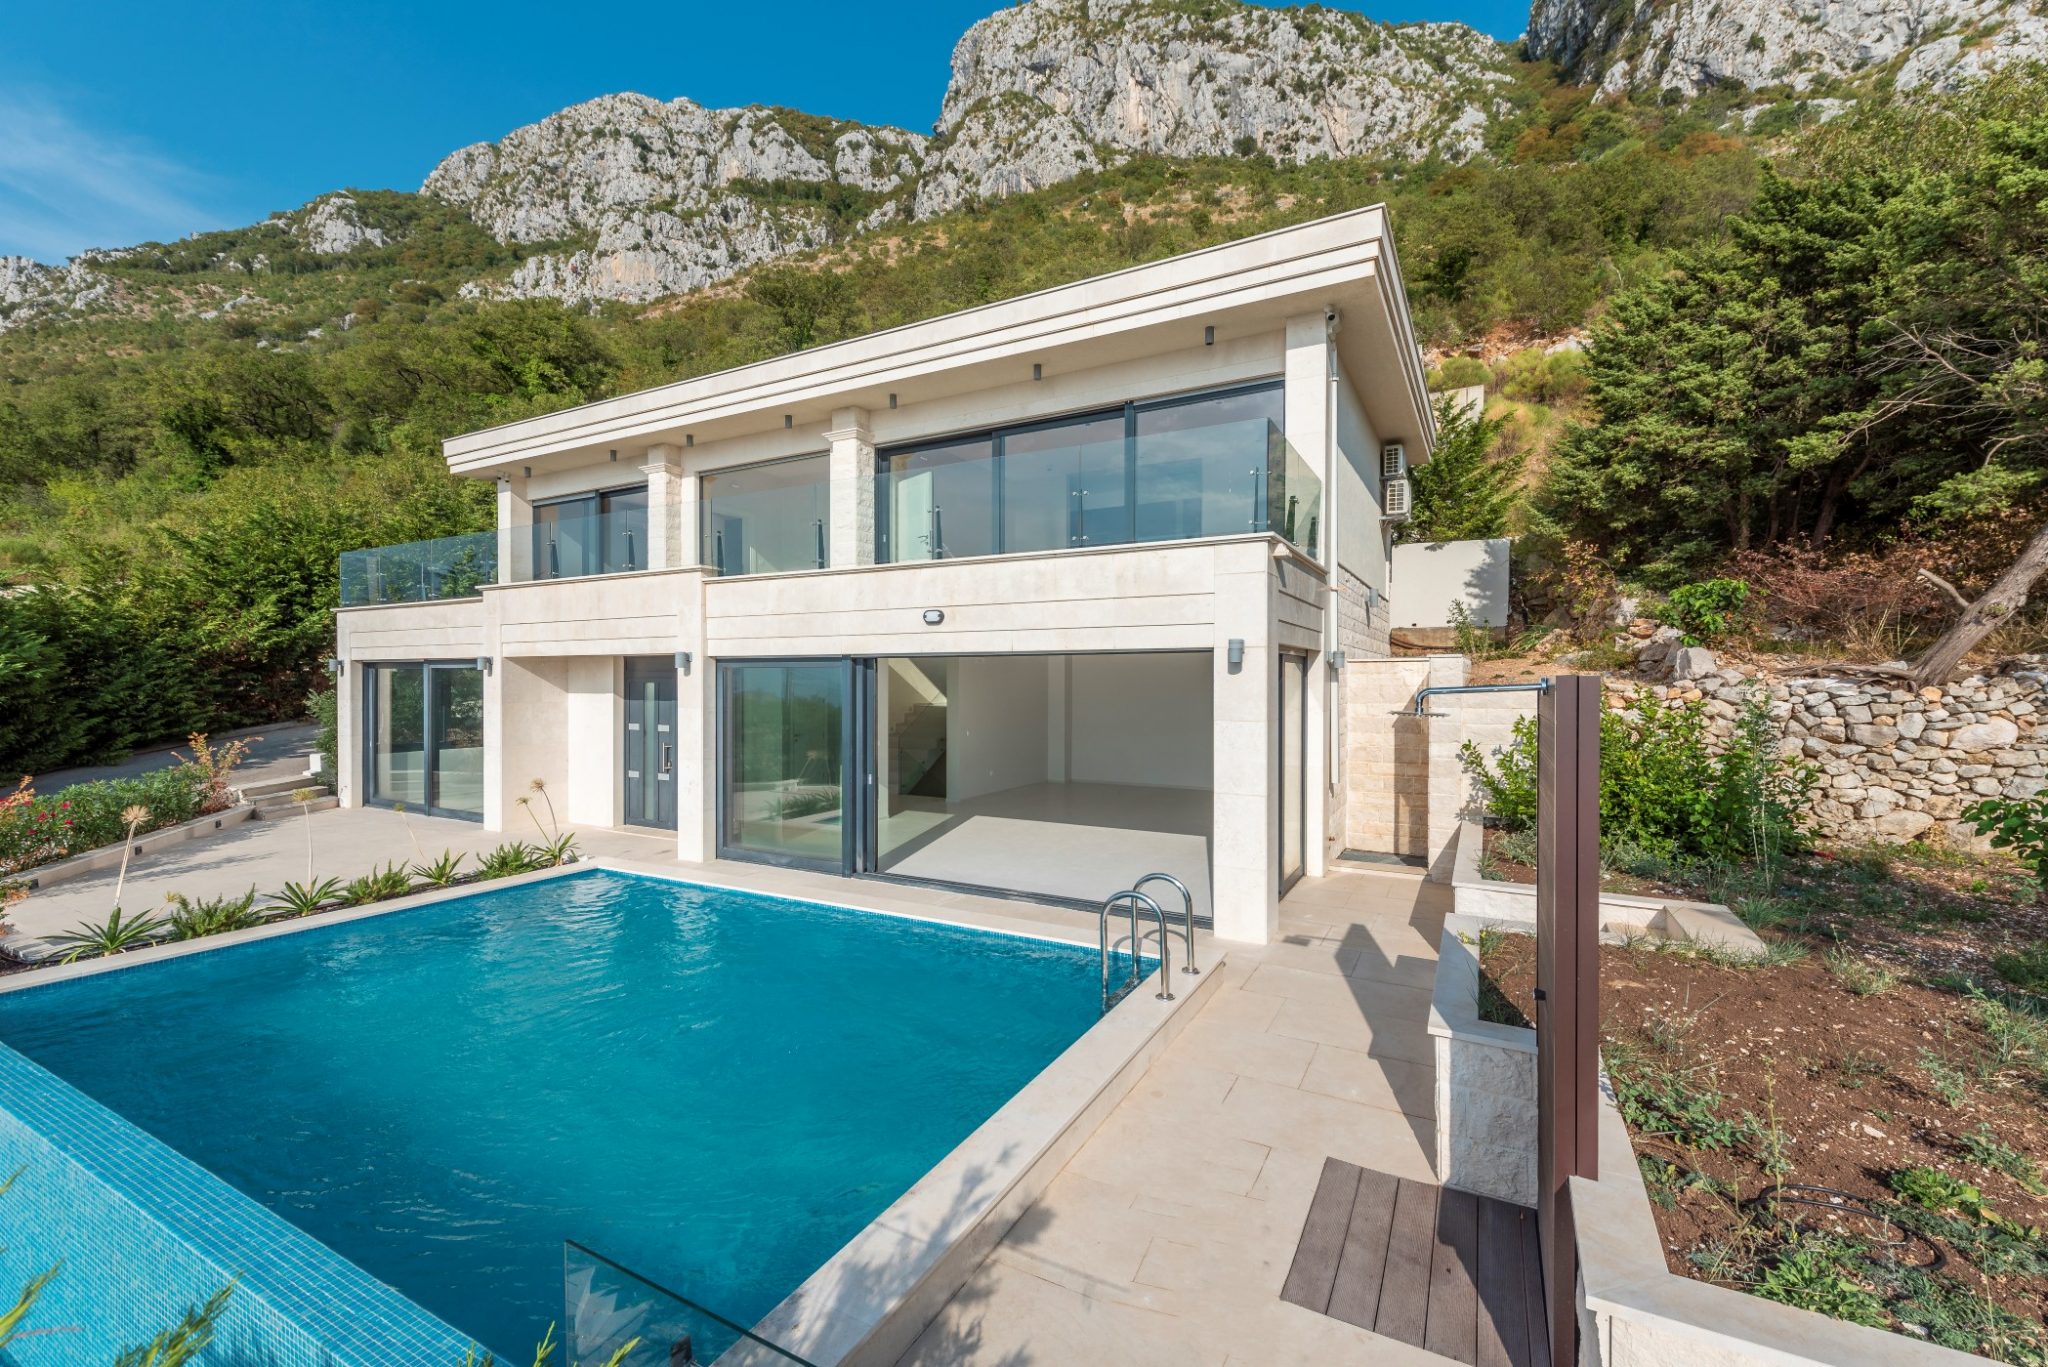 Budva, Tudorovici – modern villa with swimming pool and garage for two vehicles